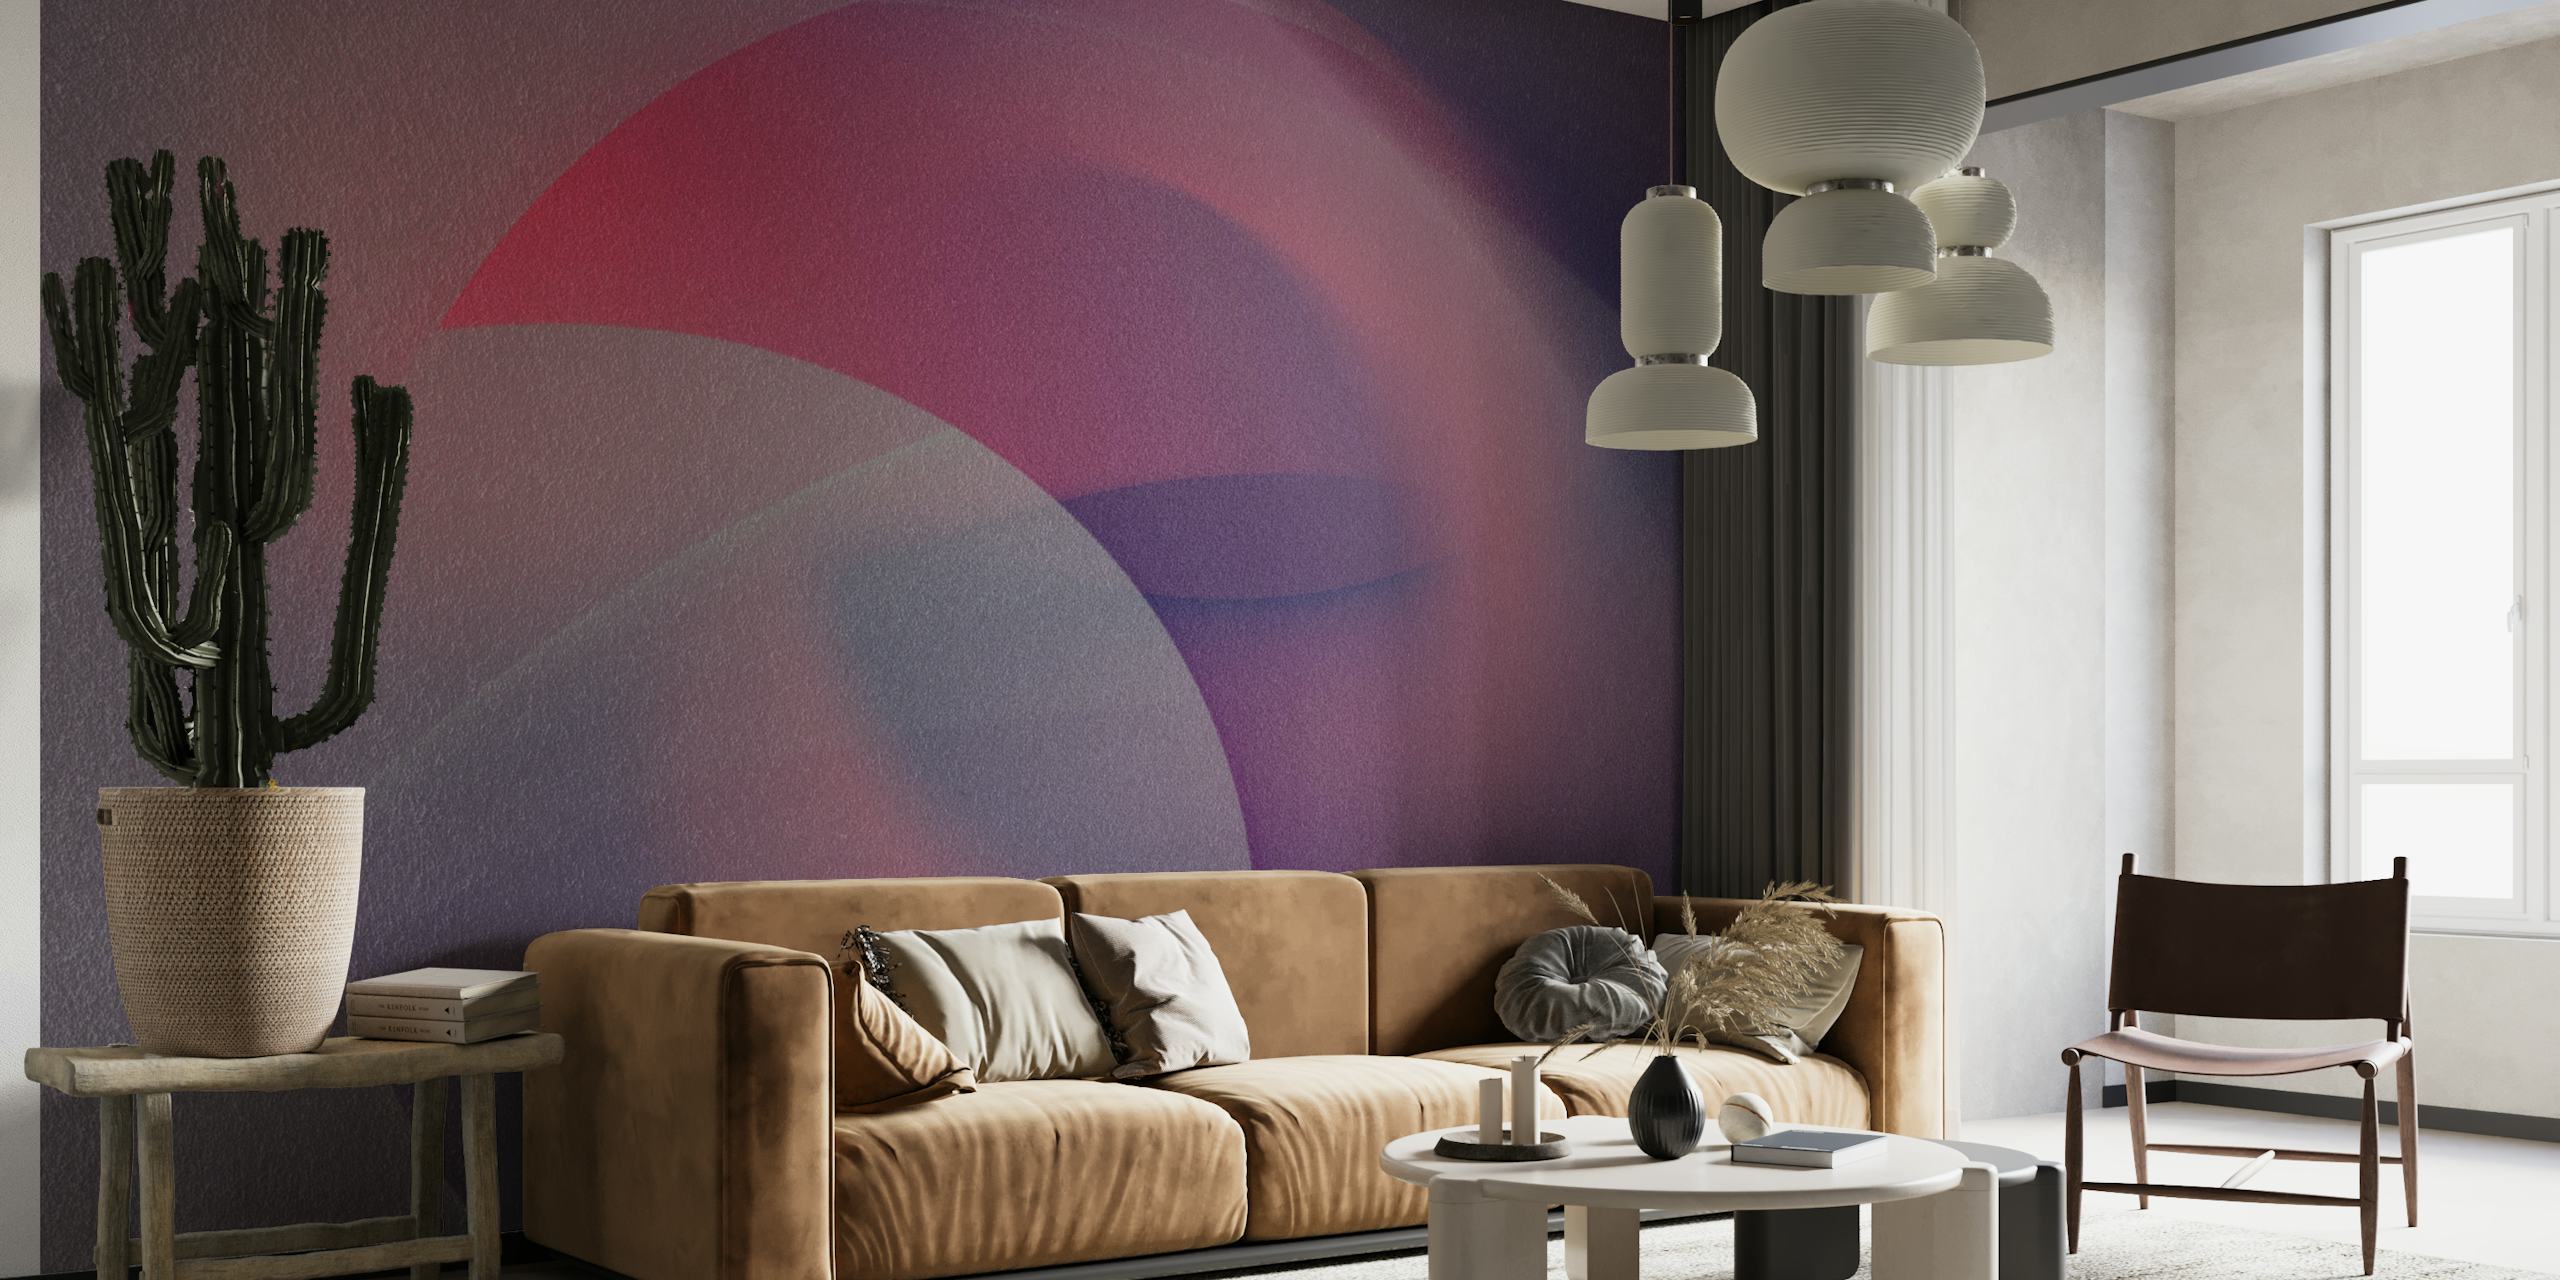 Abstract time travel-themed wall mural with overlapping circles in shades of purple and red